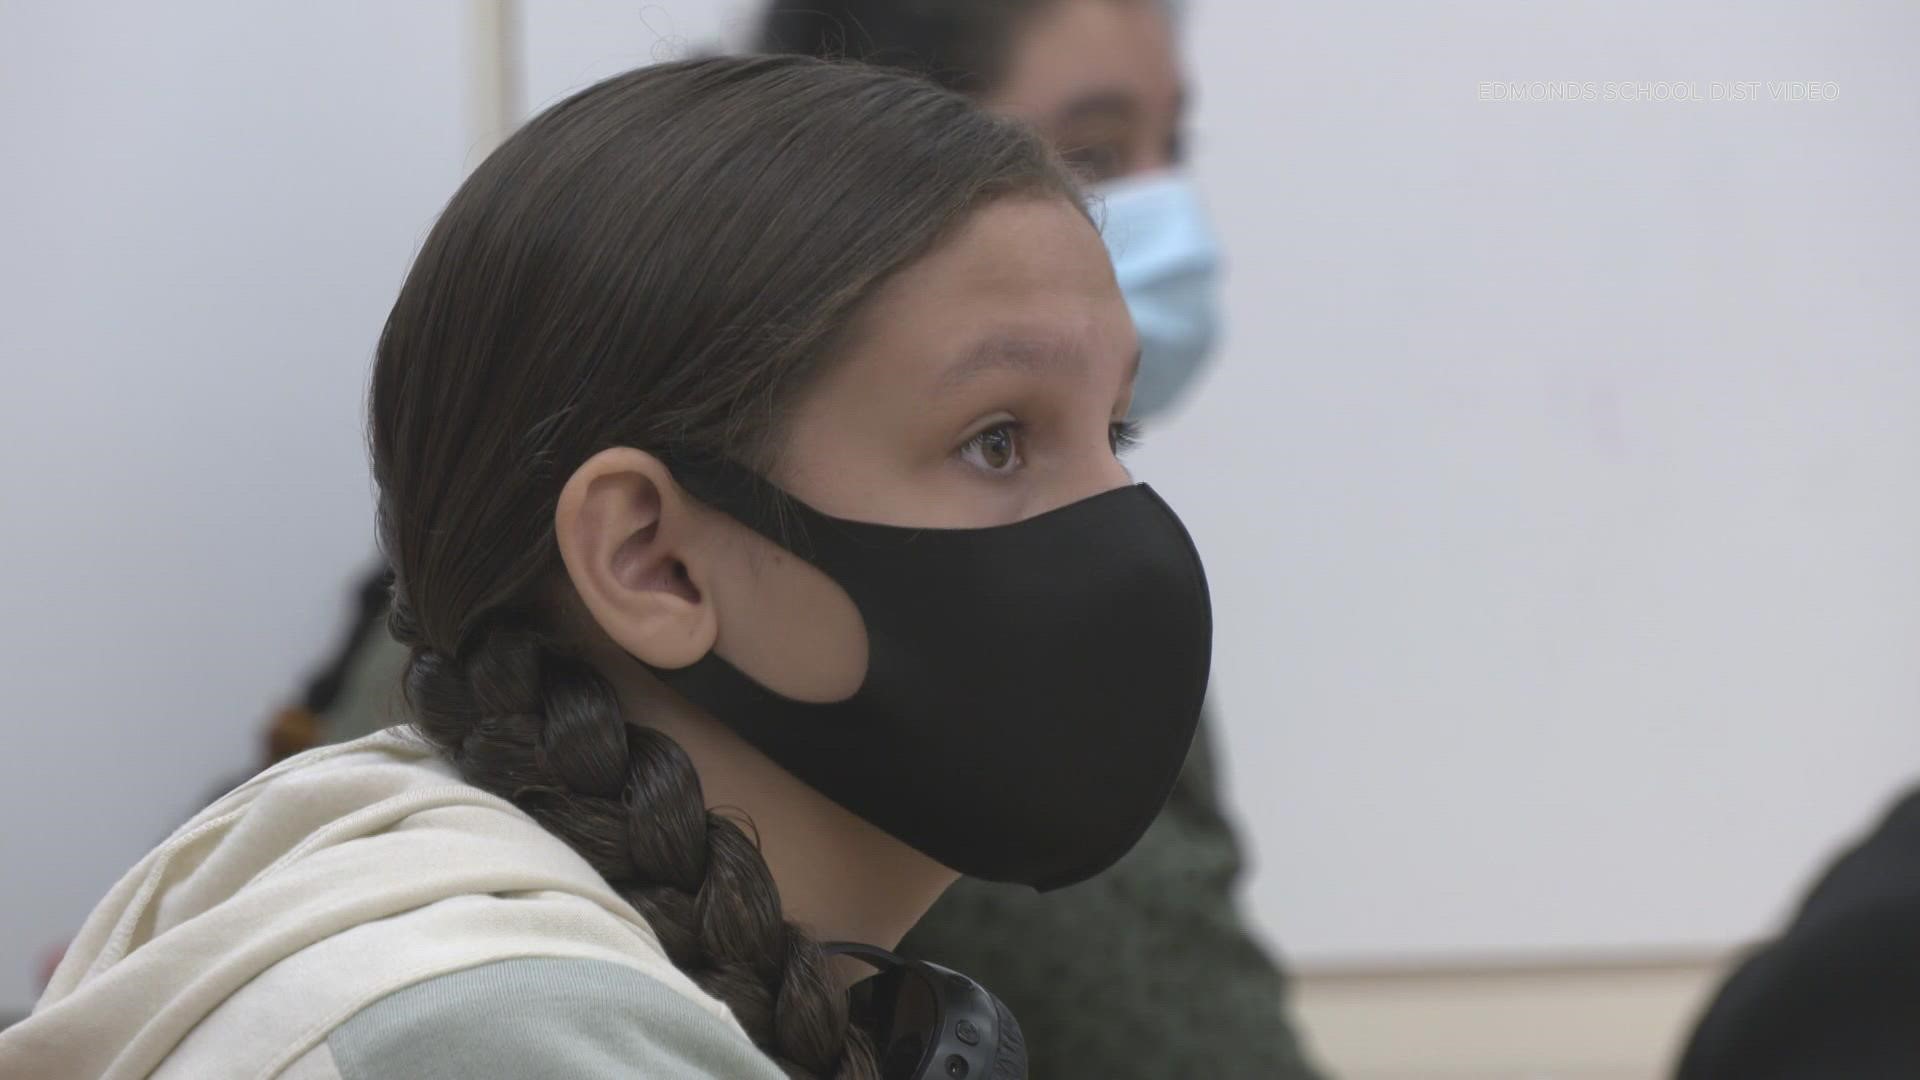 The state Department of Health does not require masks to be worn outdoors in school settings, but the Edmonds School District is taking extra precautions.